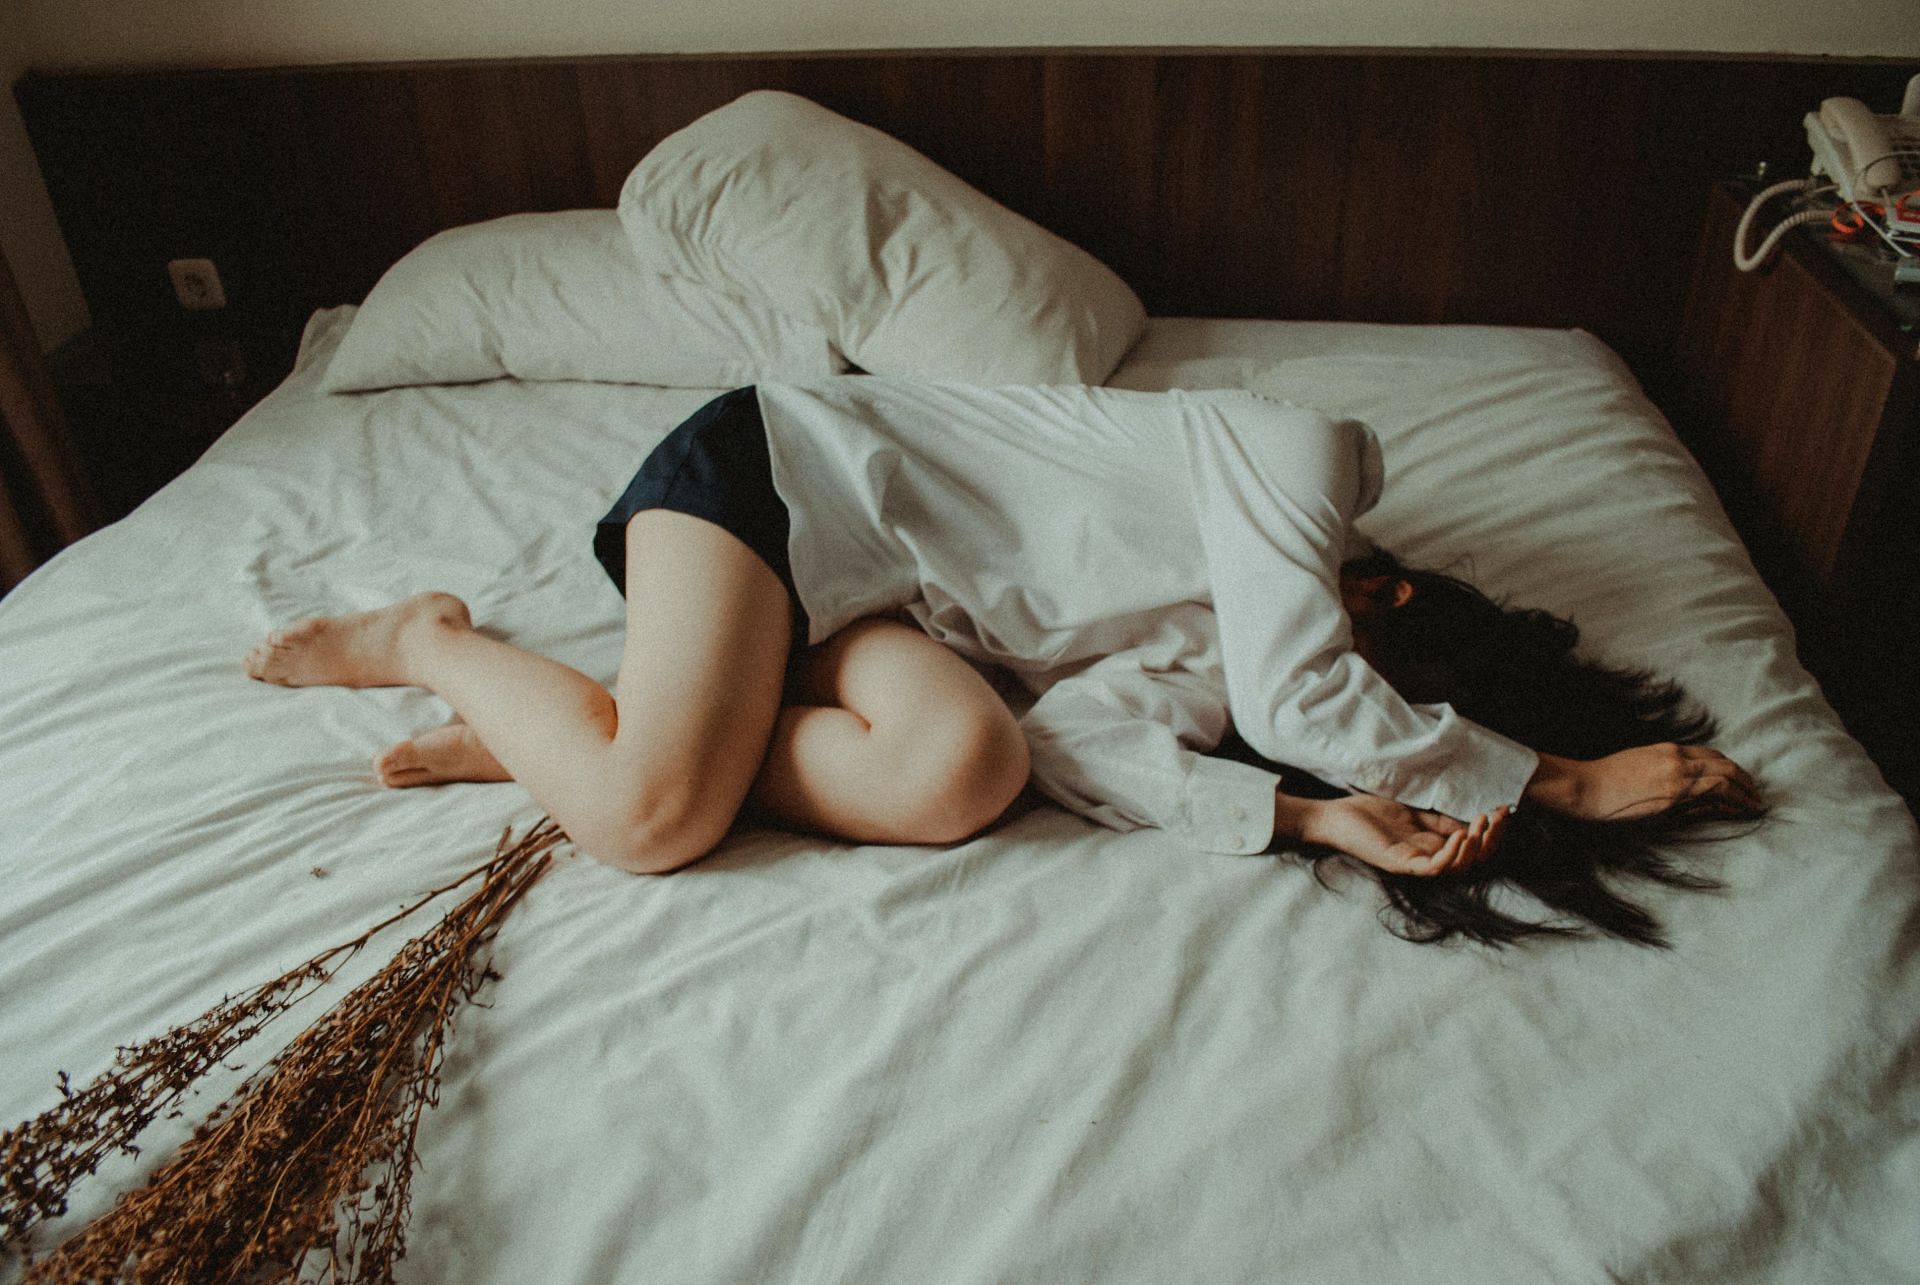 Heating pads for periods - Be careful on sensitive skin (Image via Unsplash/Yuris Alhumaydy)